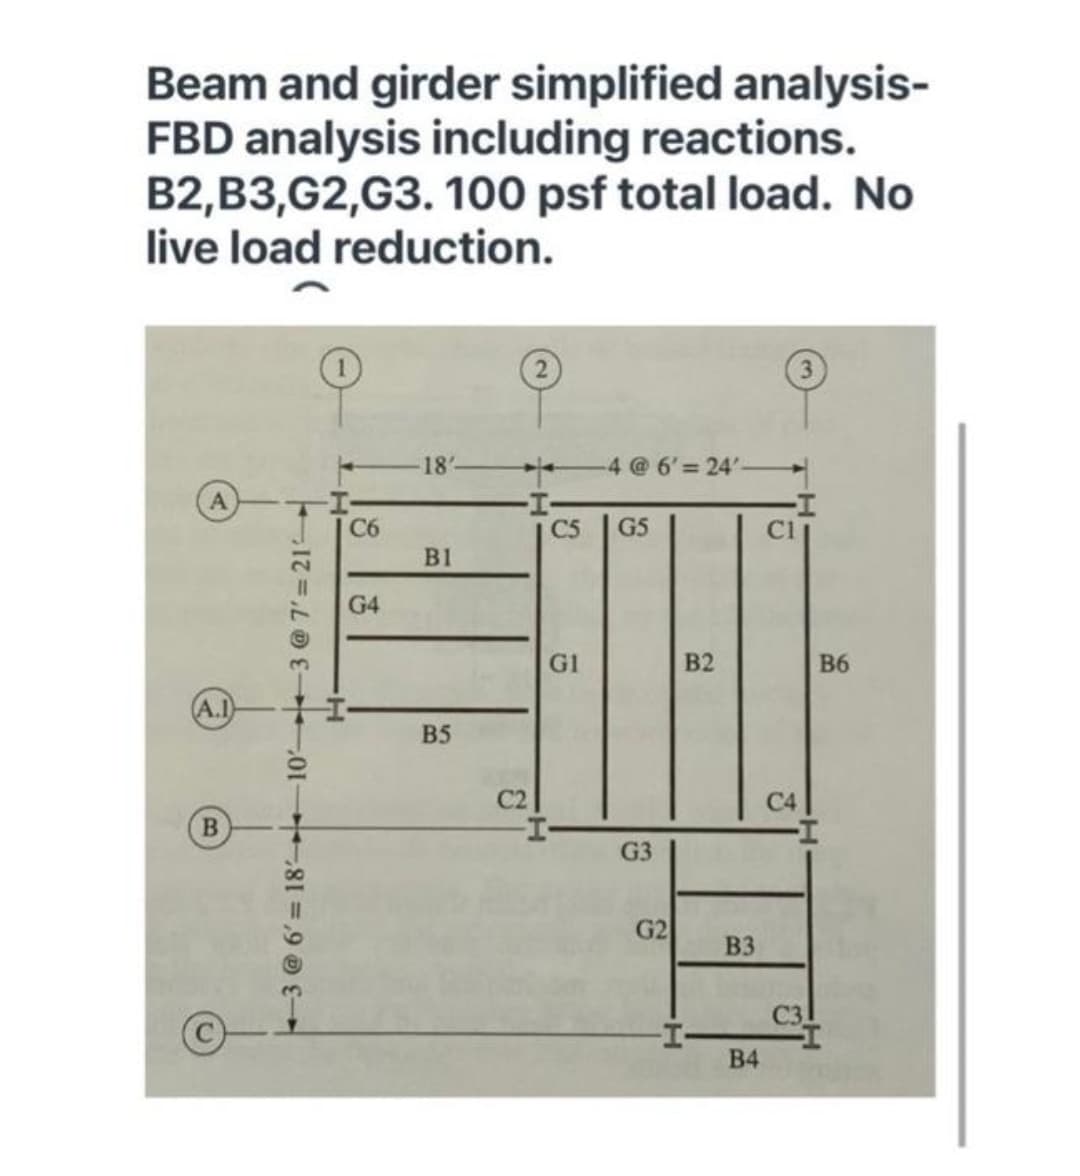 Beam and girder simplified analysis-
FBD analysis including reactions.
B2,B3,G2,G3. 100 psf total load. No
live load reduction.
18'
4 @6'= 24'
C6
C5
G5
C1
B1
G4
G1
B2
B6
A.I
B5
C2
C4
G3
G2
B3
C3
B4
3 @ 6'=18 10 3@ 7'=21
